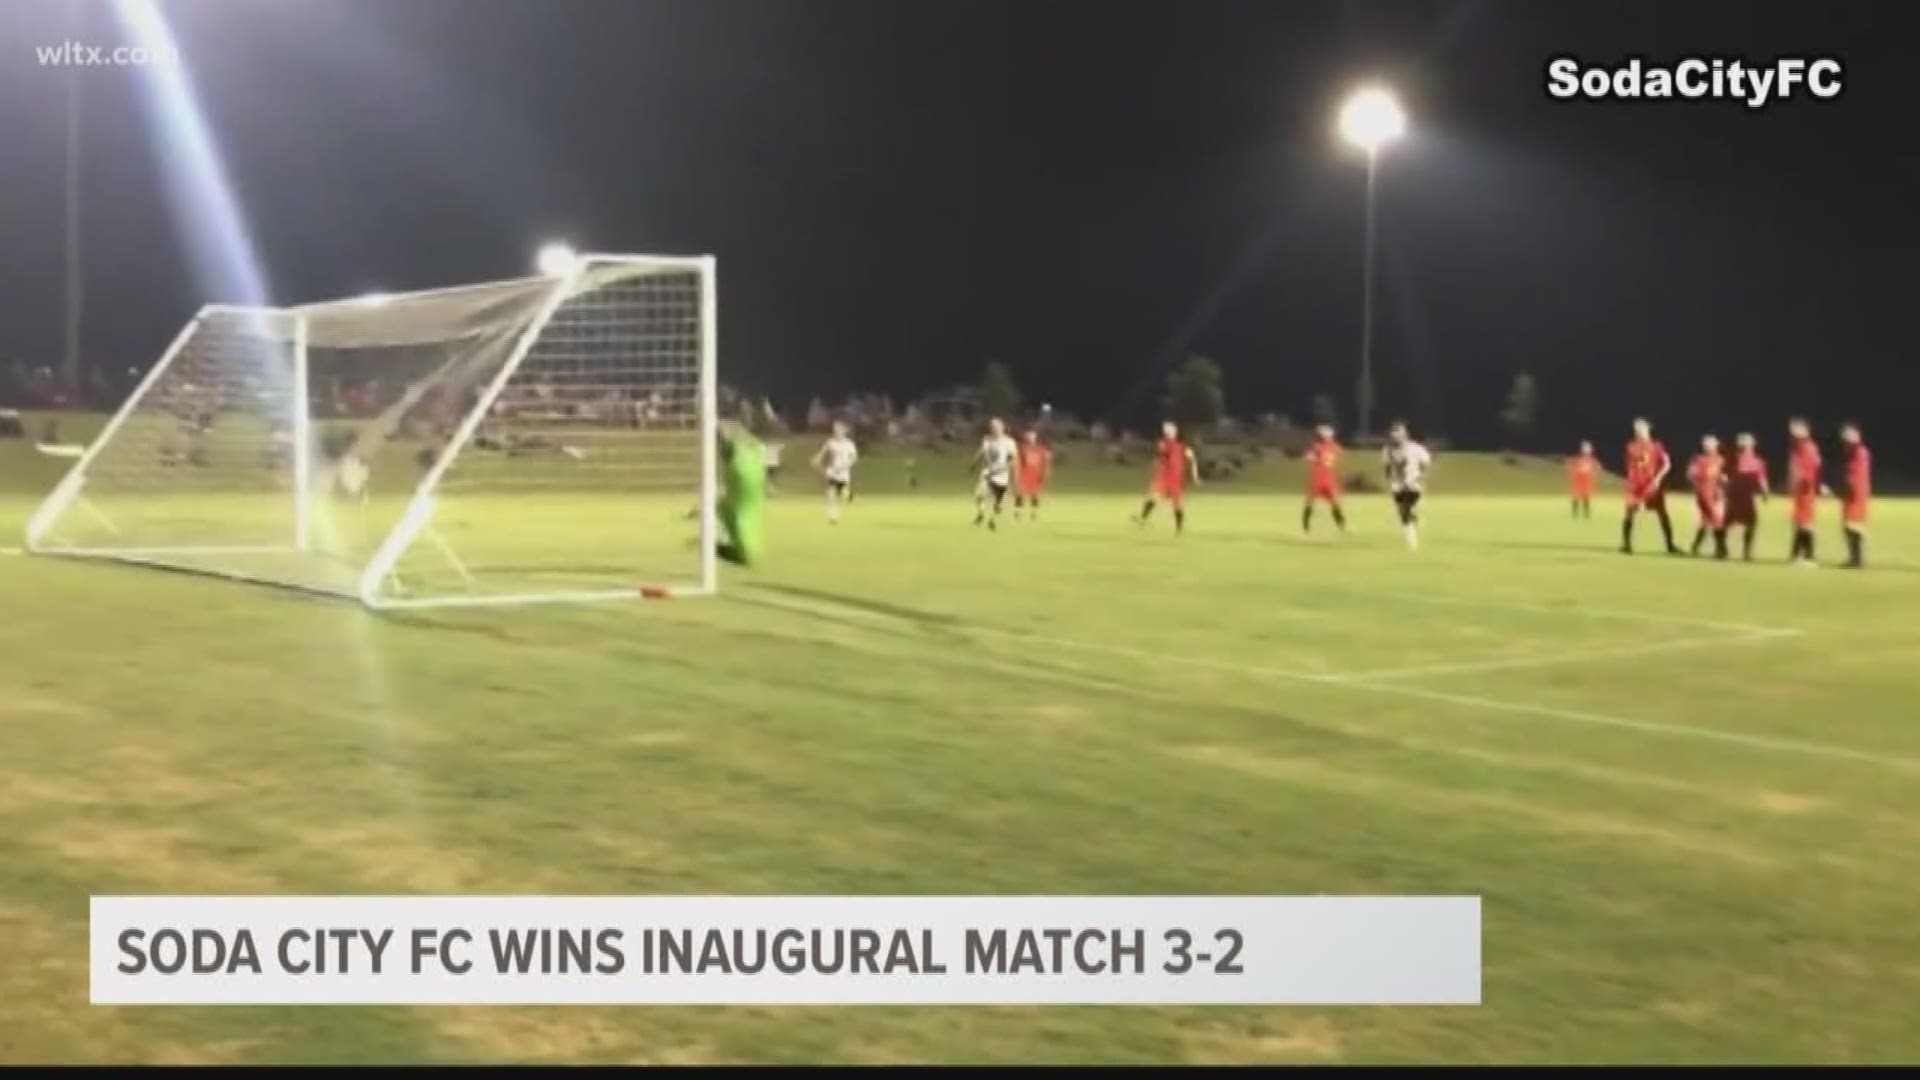 The local semipro soccer team, Soda City FC, won it's very first home game this weekend with a thrilling 3-2 win at the Saluda Shoals Complex.